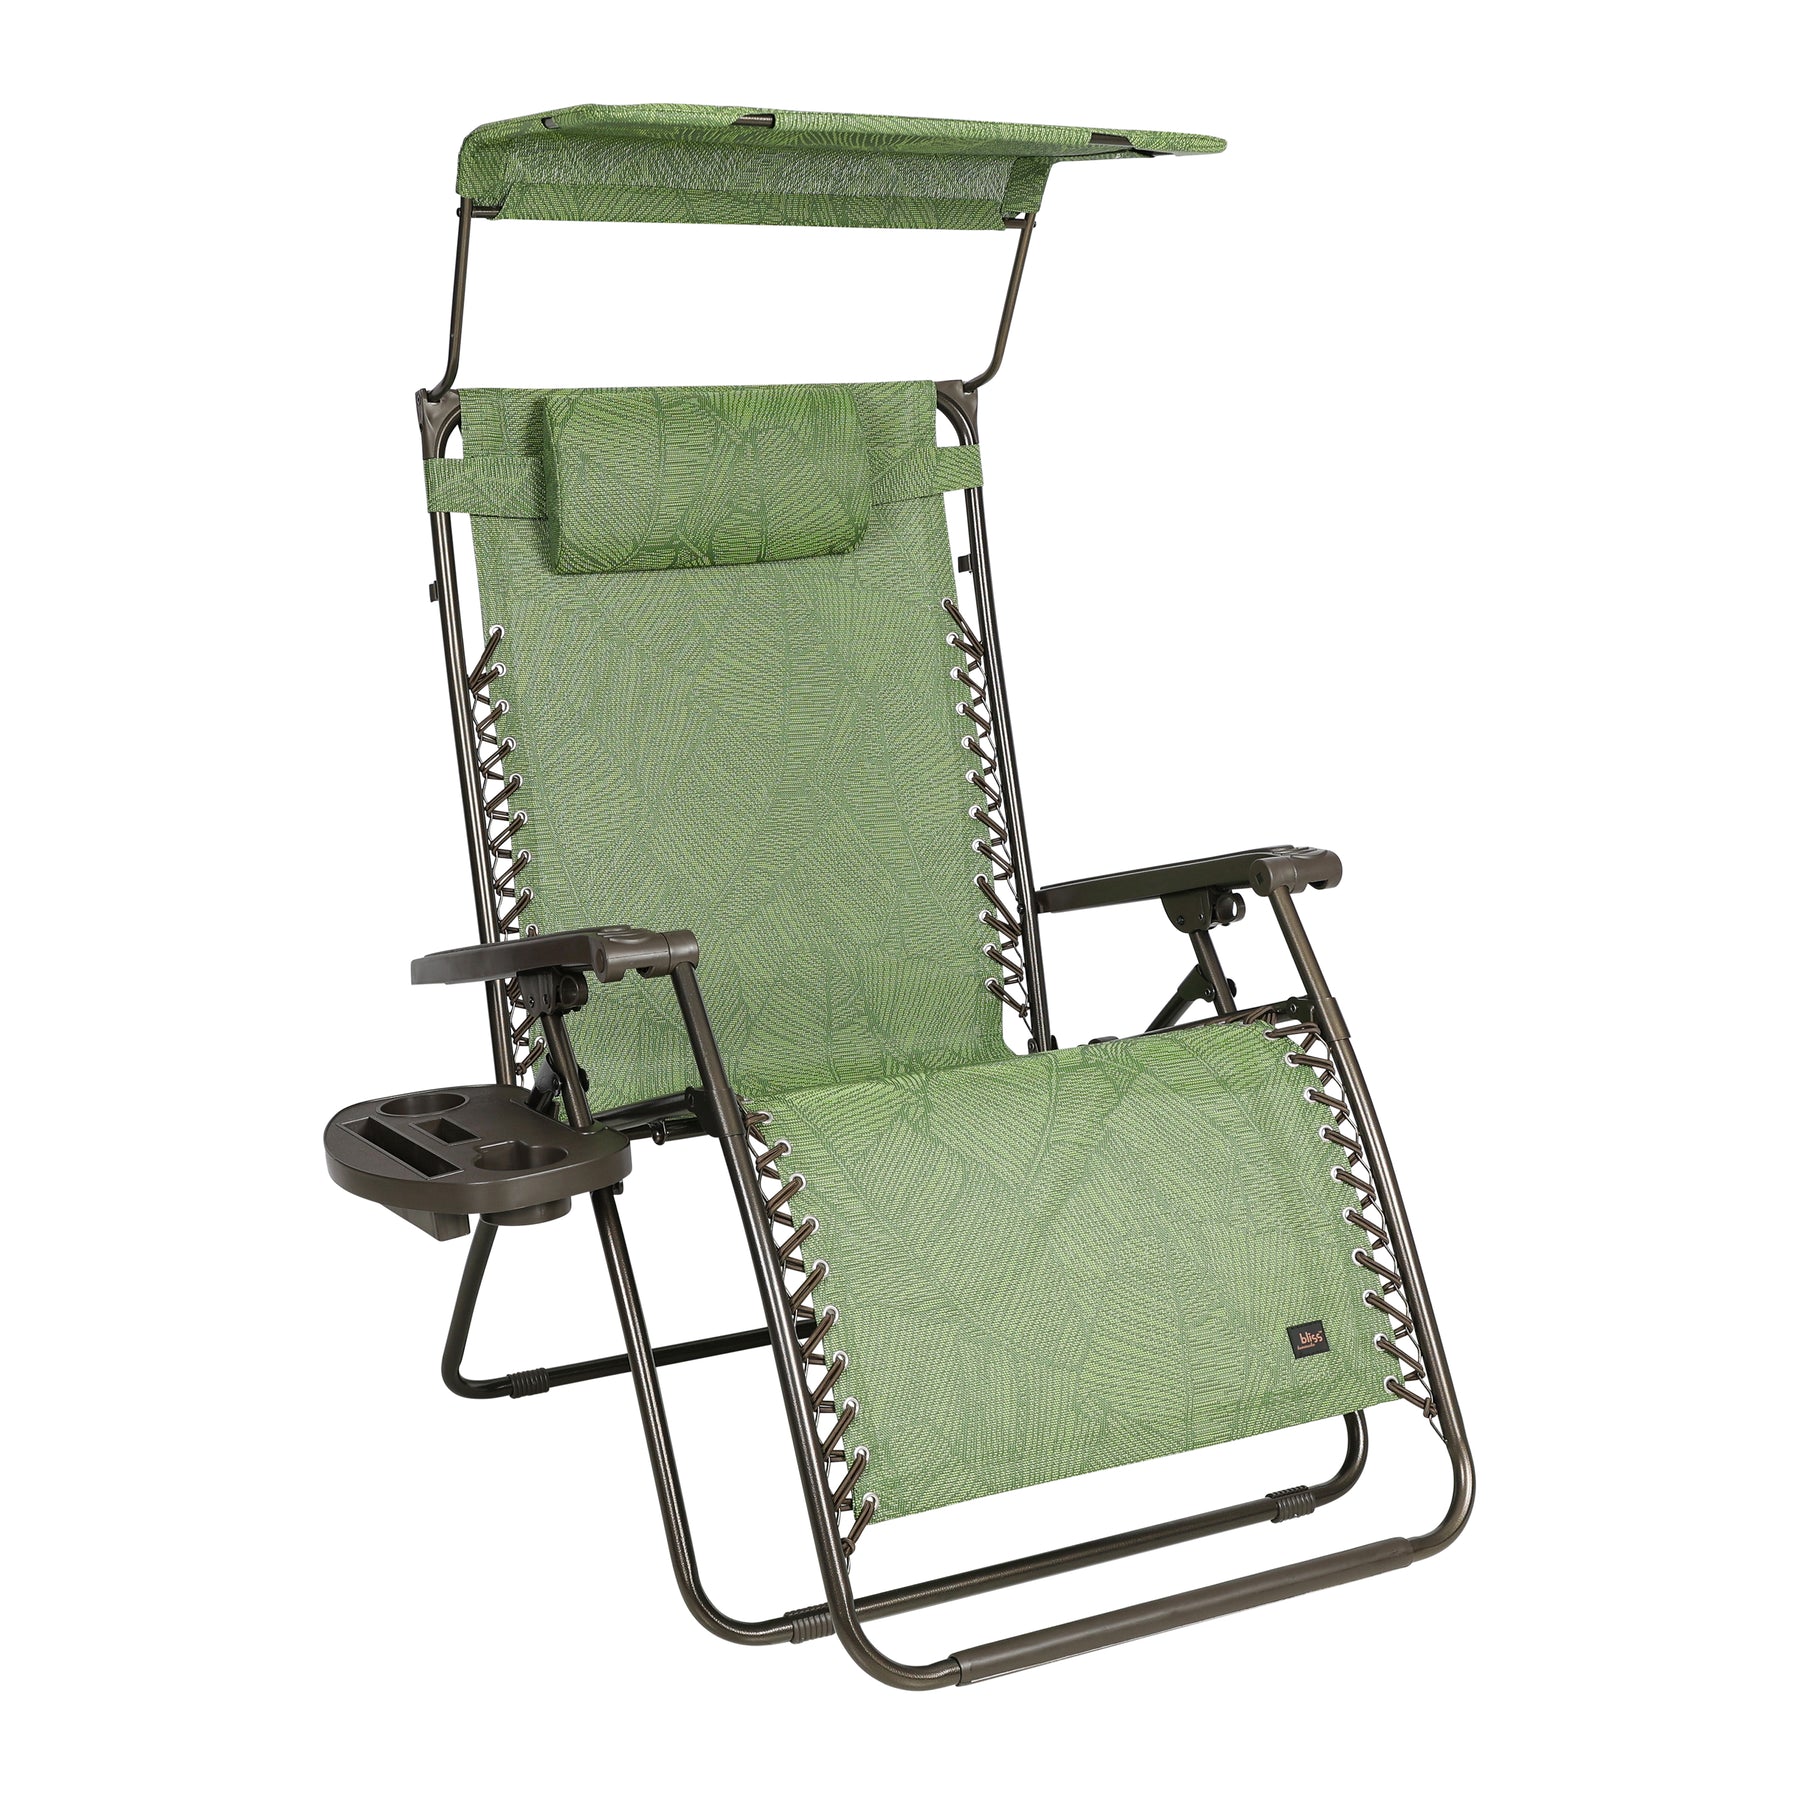 Bliss Hammocks 33-inch Wide XXL Zero Gravity Chair with Adjustable Canopy Sun-Shade, Drink Tray, and Adjustable Pillow in the green banana leaves variation.